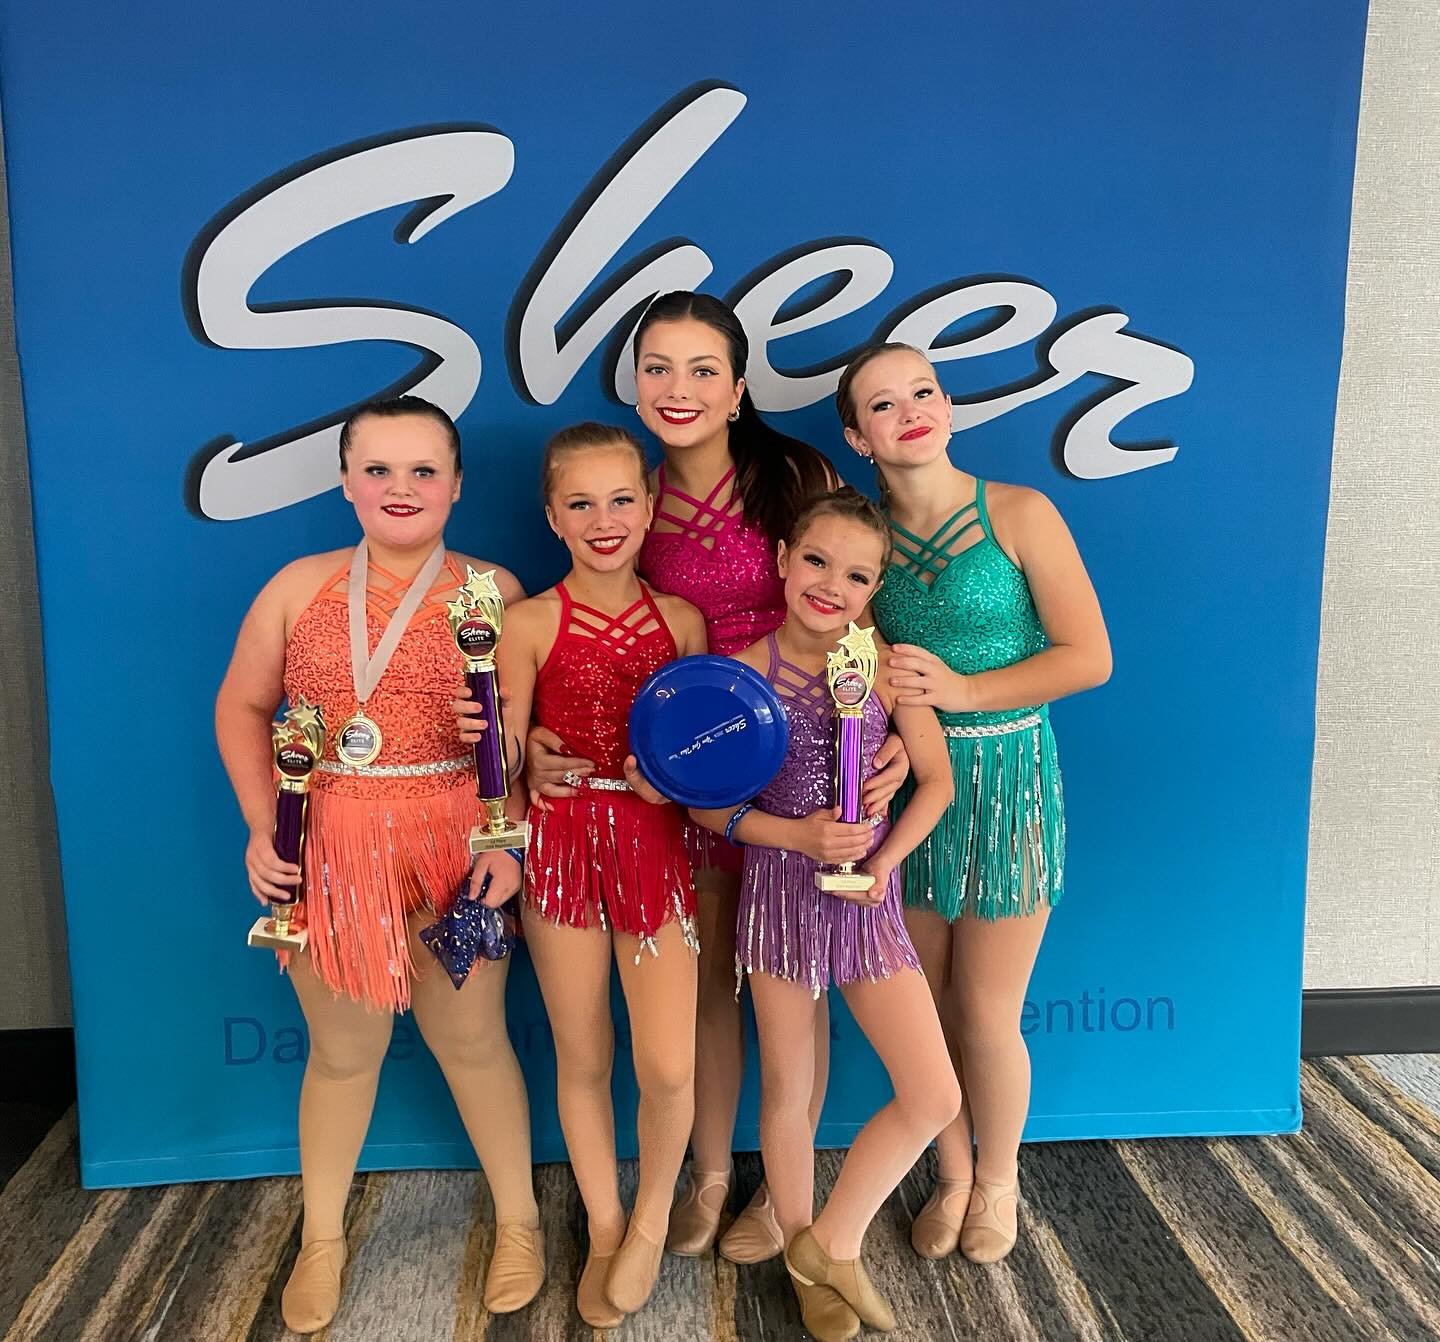 Today was OUR Day at Sheer 🤩 1st overall for group, 1st overall for trio, 1st overall Vocal- Mia with a DIAMOND 💎 &amp; Memorizing Judges award! 3rd overall solo- Liv!! 4th overall Duet- Mia &amp; Ava!! 2nd runner up for Title- Ani!! Miss Sheer Eli